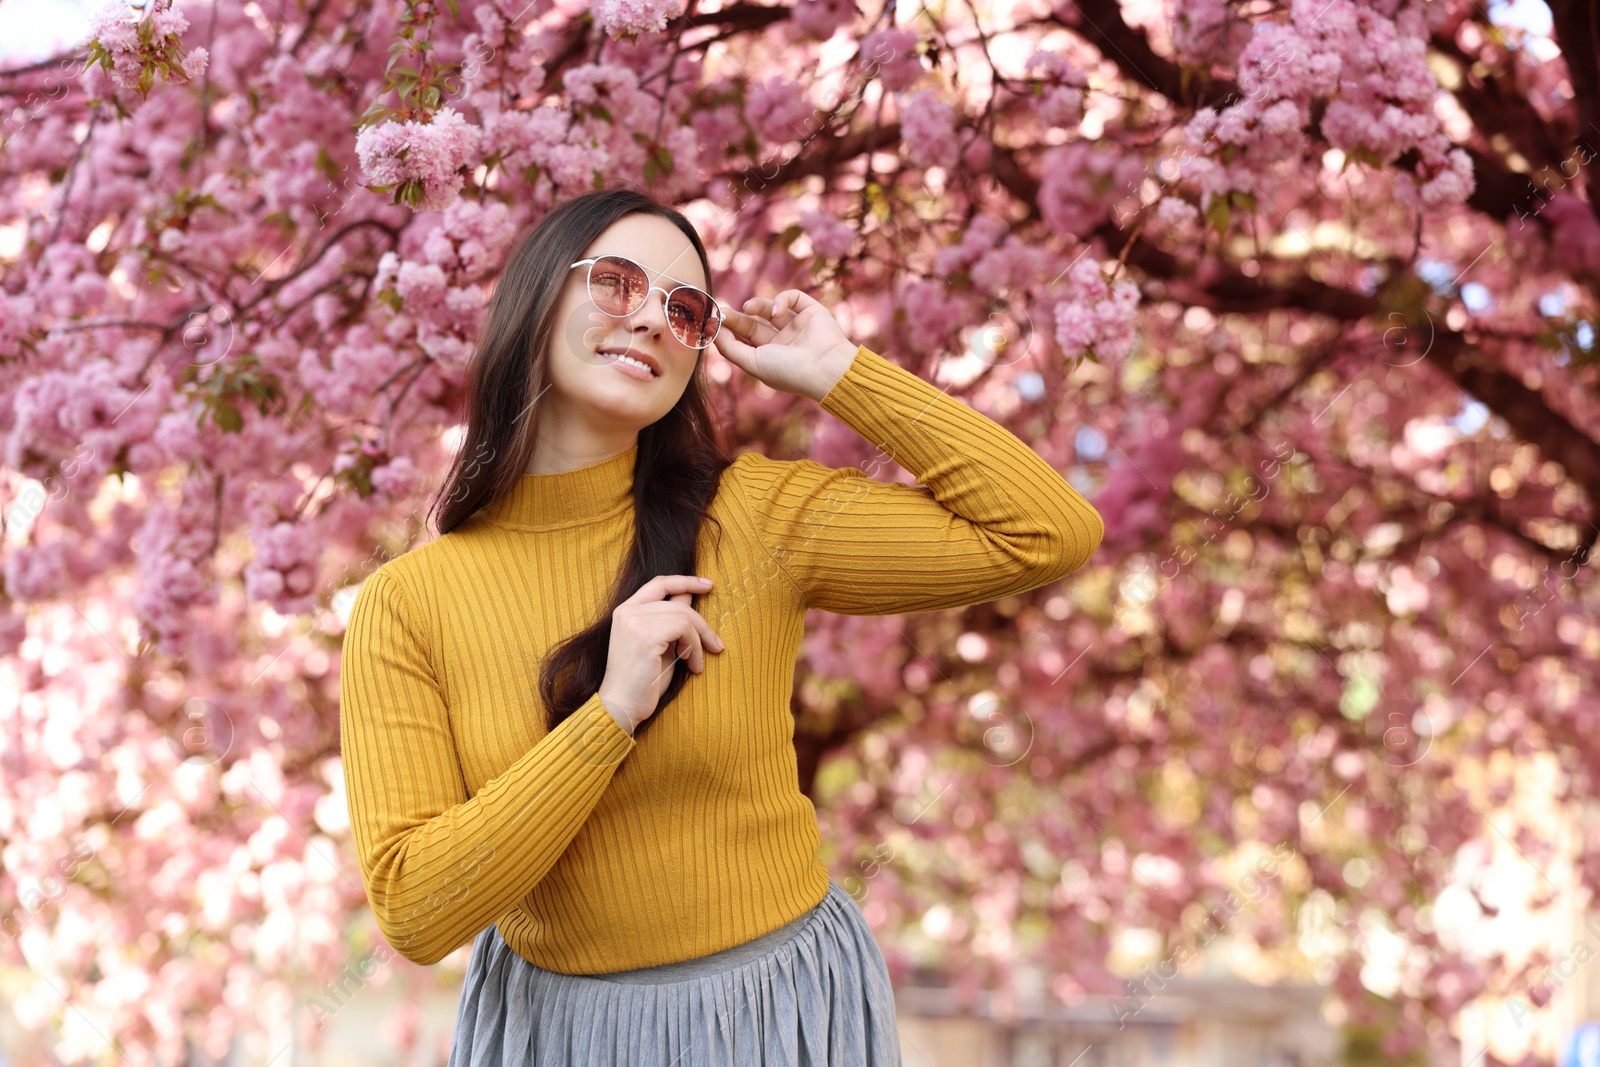 Photo of Beautiful woman in sunglasses near blossoming tree on spring day, space for text